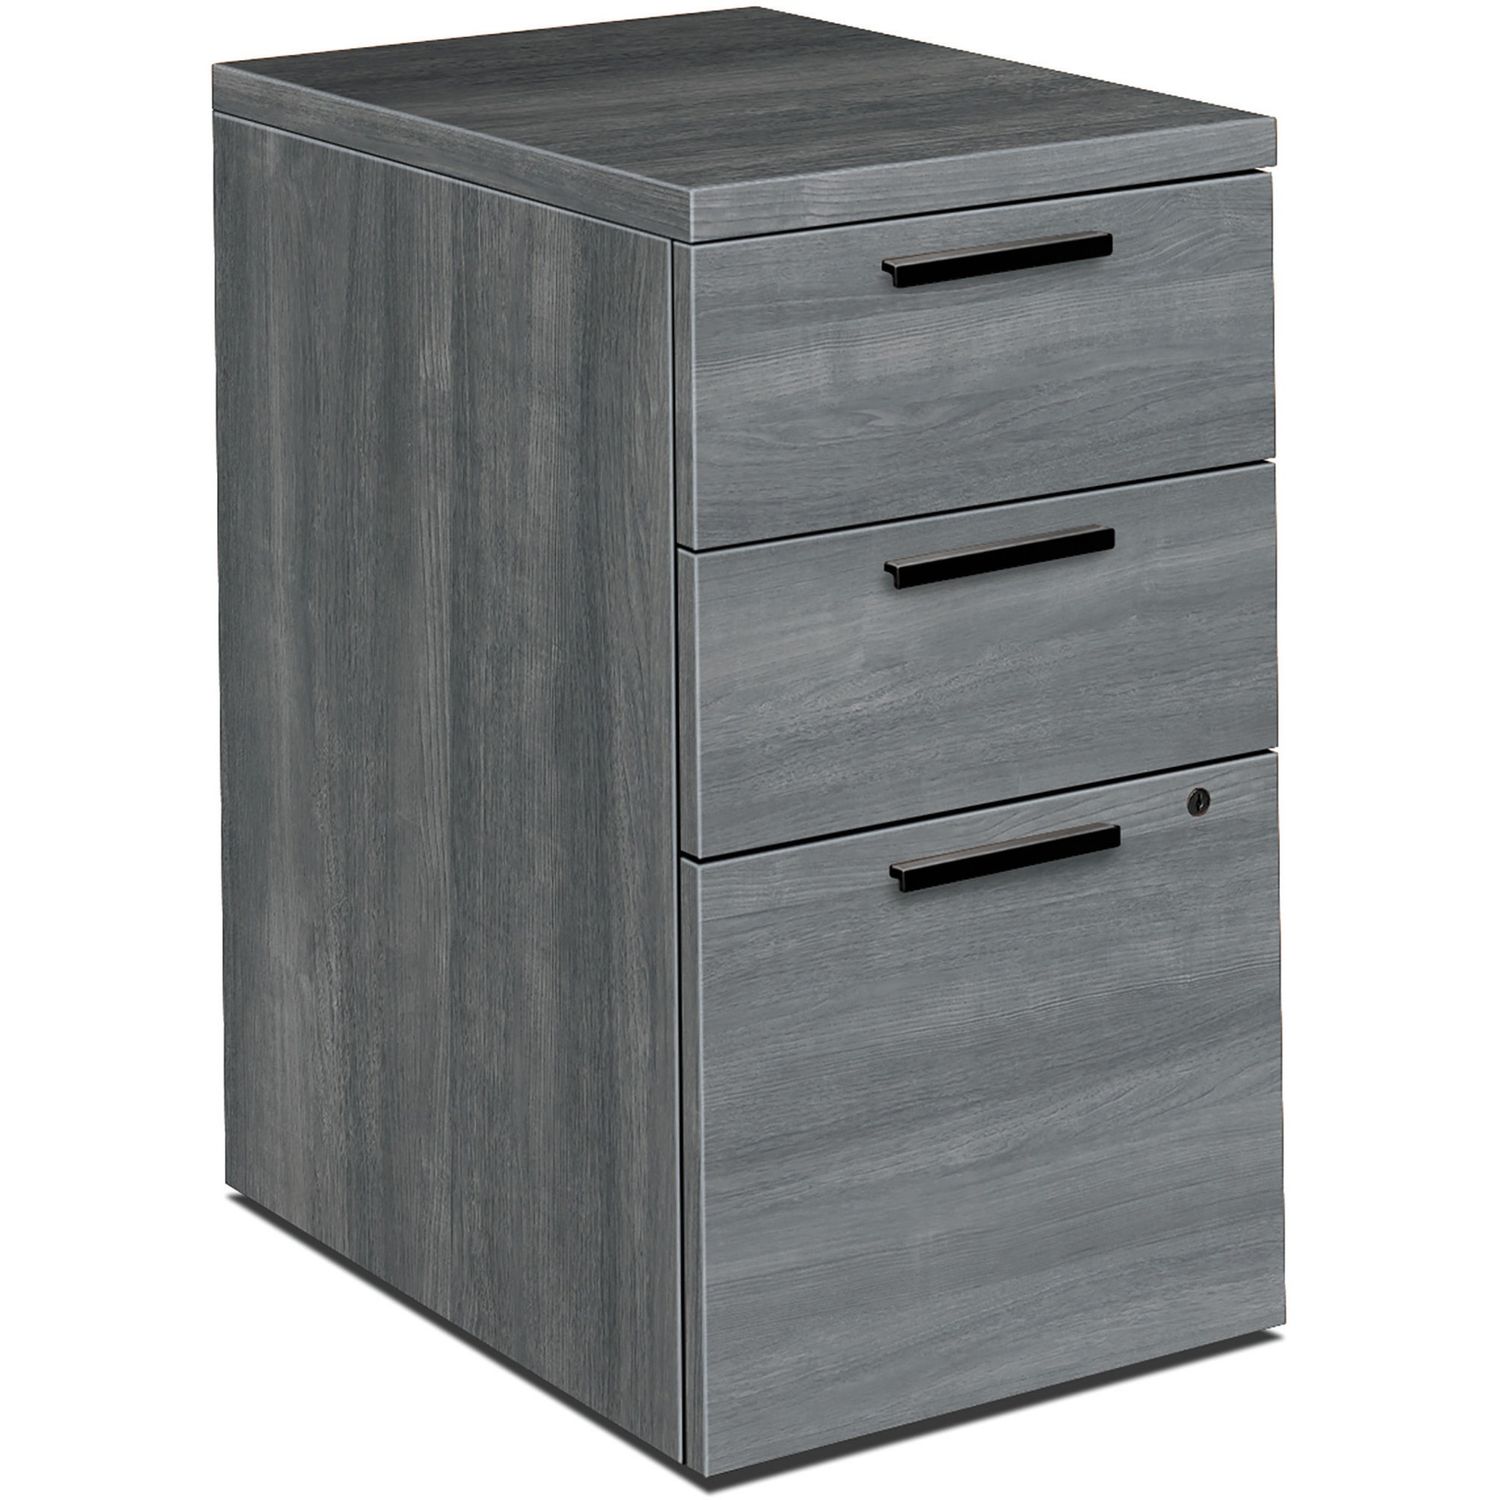 10500 Series Mobile Pedestal 15.8" x 22.8"28" , 2" Caster, 2 x Box Drawer(s), File Drawer(s), Flat Edge, Material: Thermofused Laminate (TFL), Wood, Finish: Sterling Ash Laminate